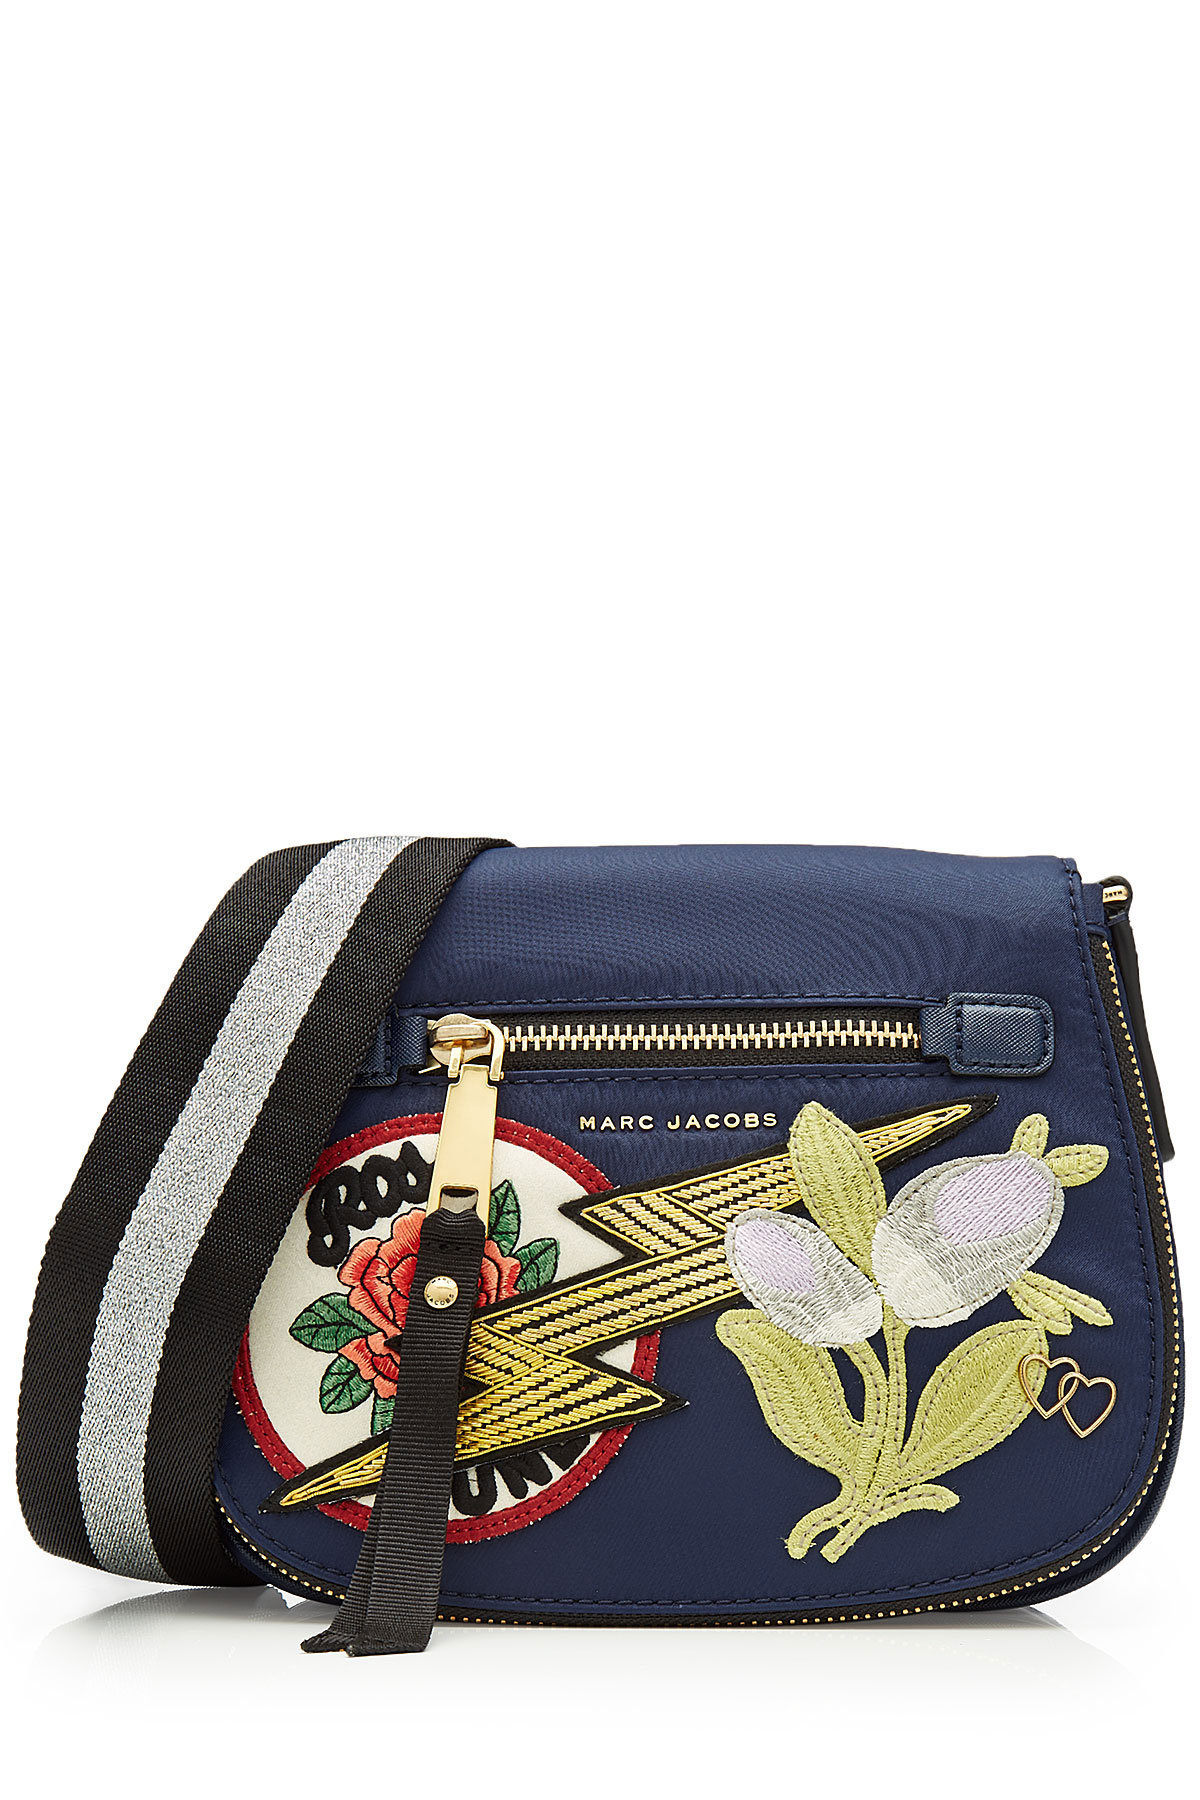 Marc Jacobs - Shoulder Bag with Patches